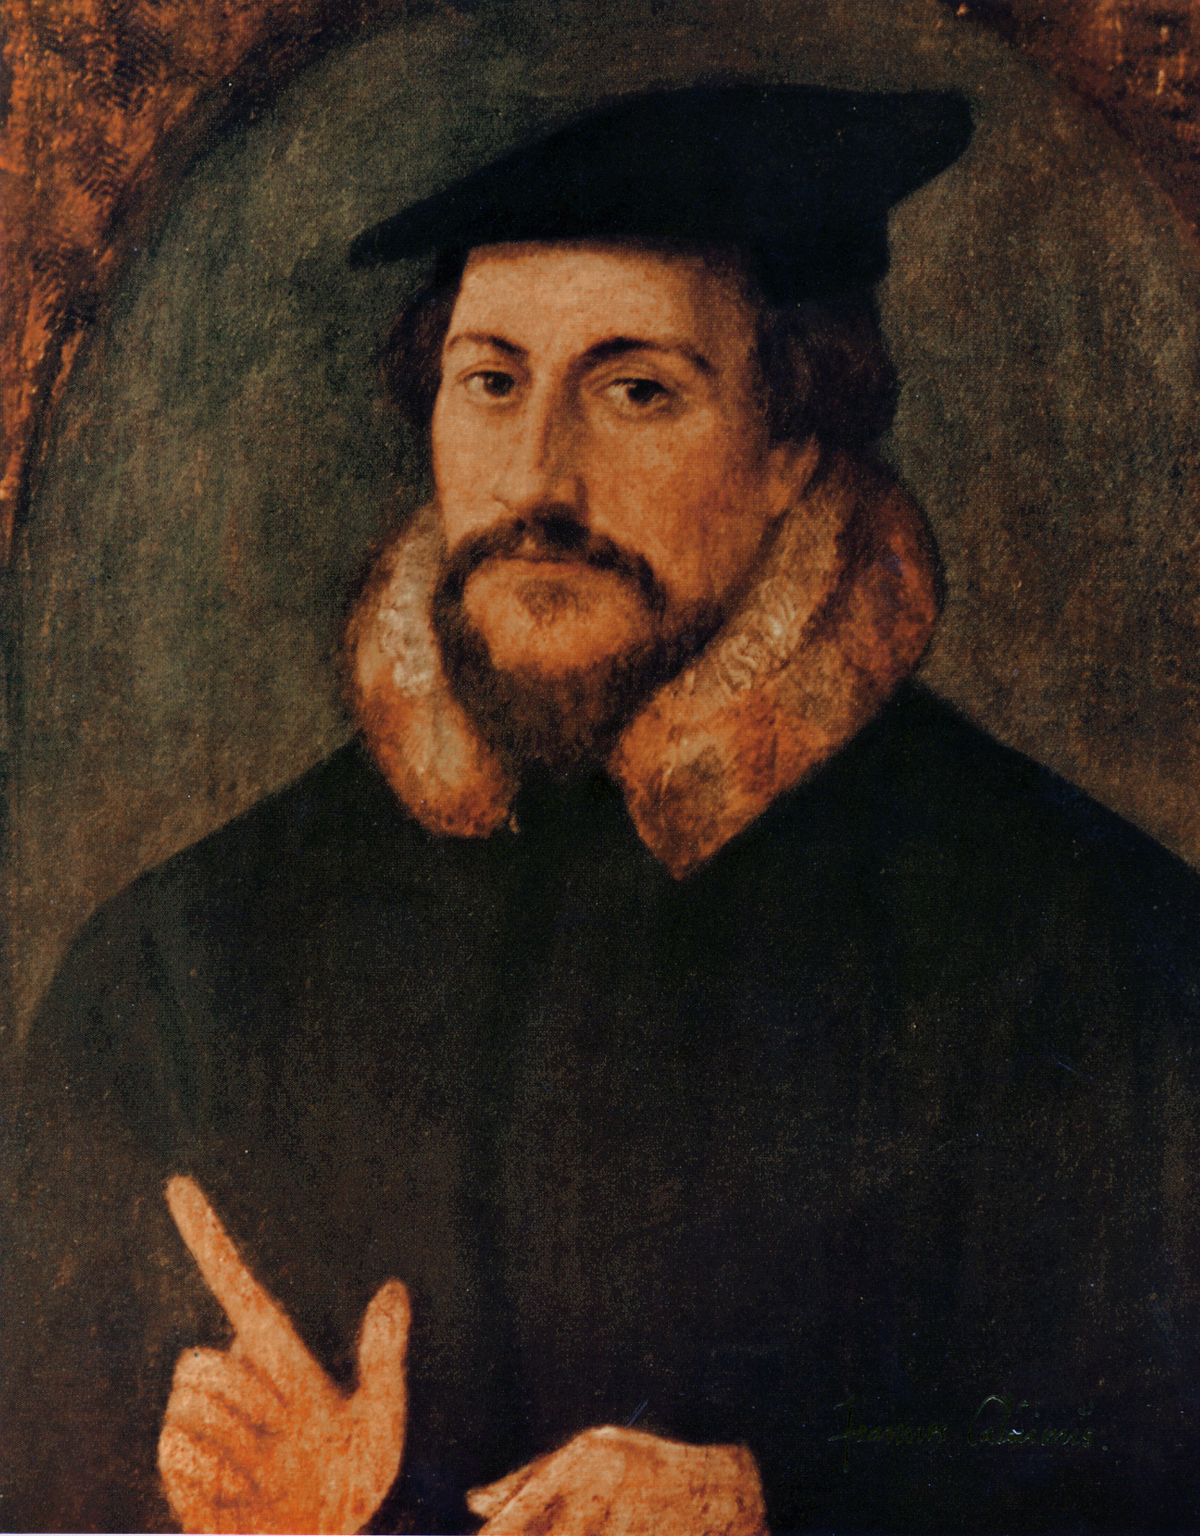 John Calvin by Holbein.png